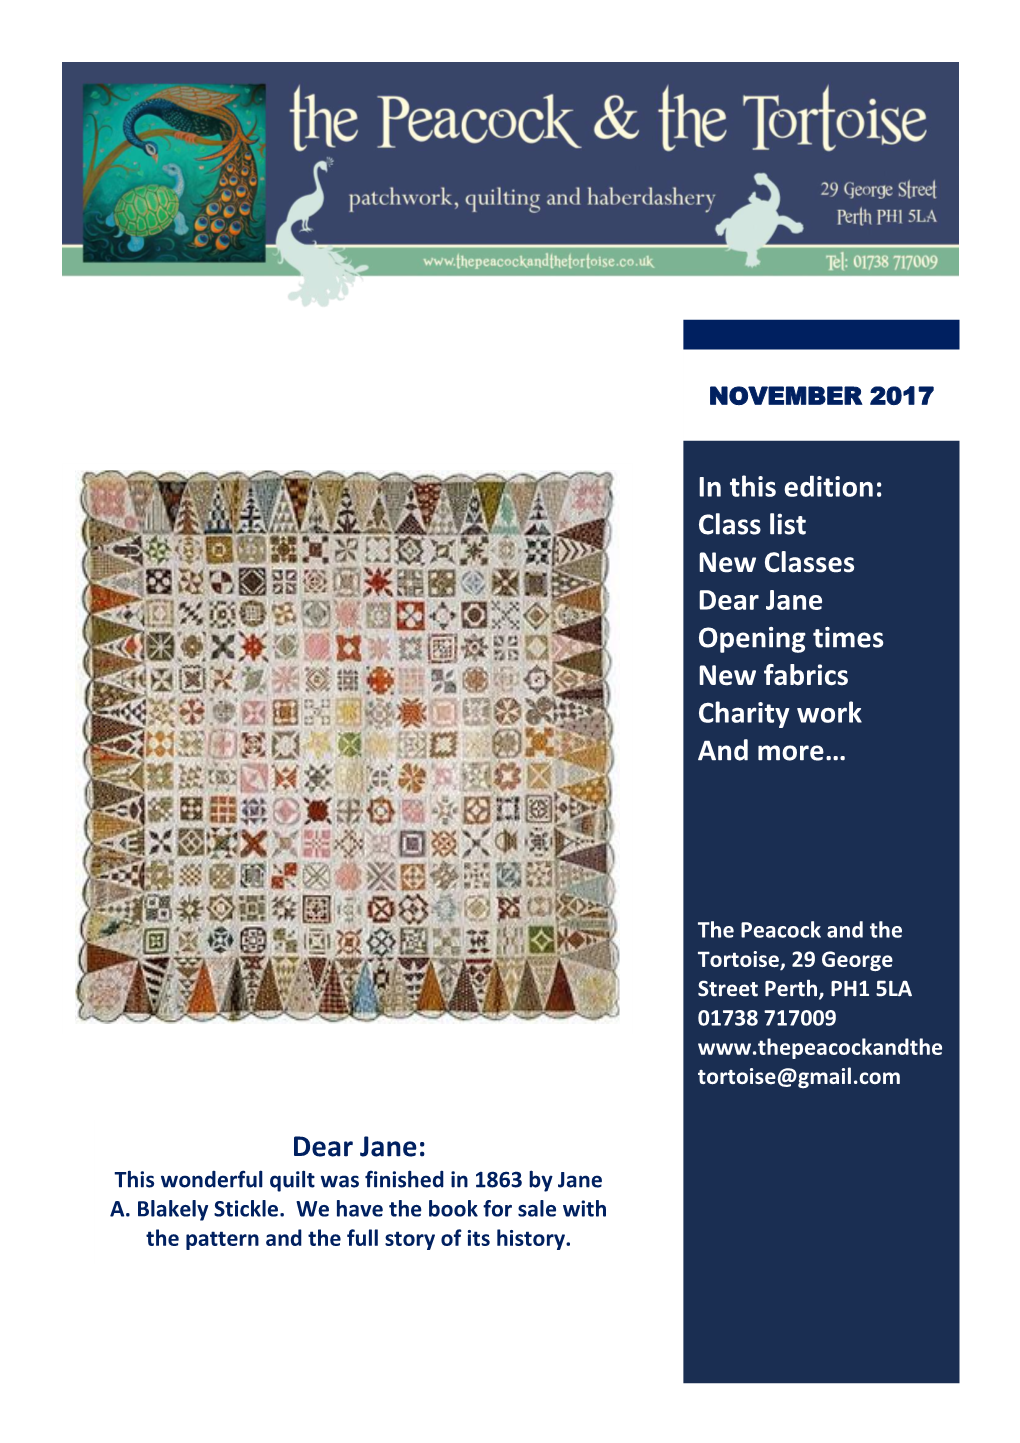 Dear Jane Opening Times New Fabrics Charity Work and More…